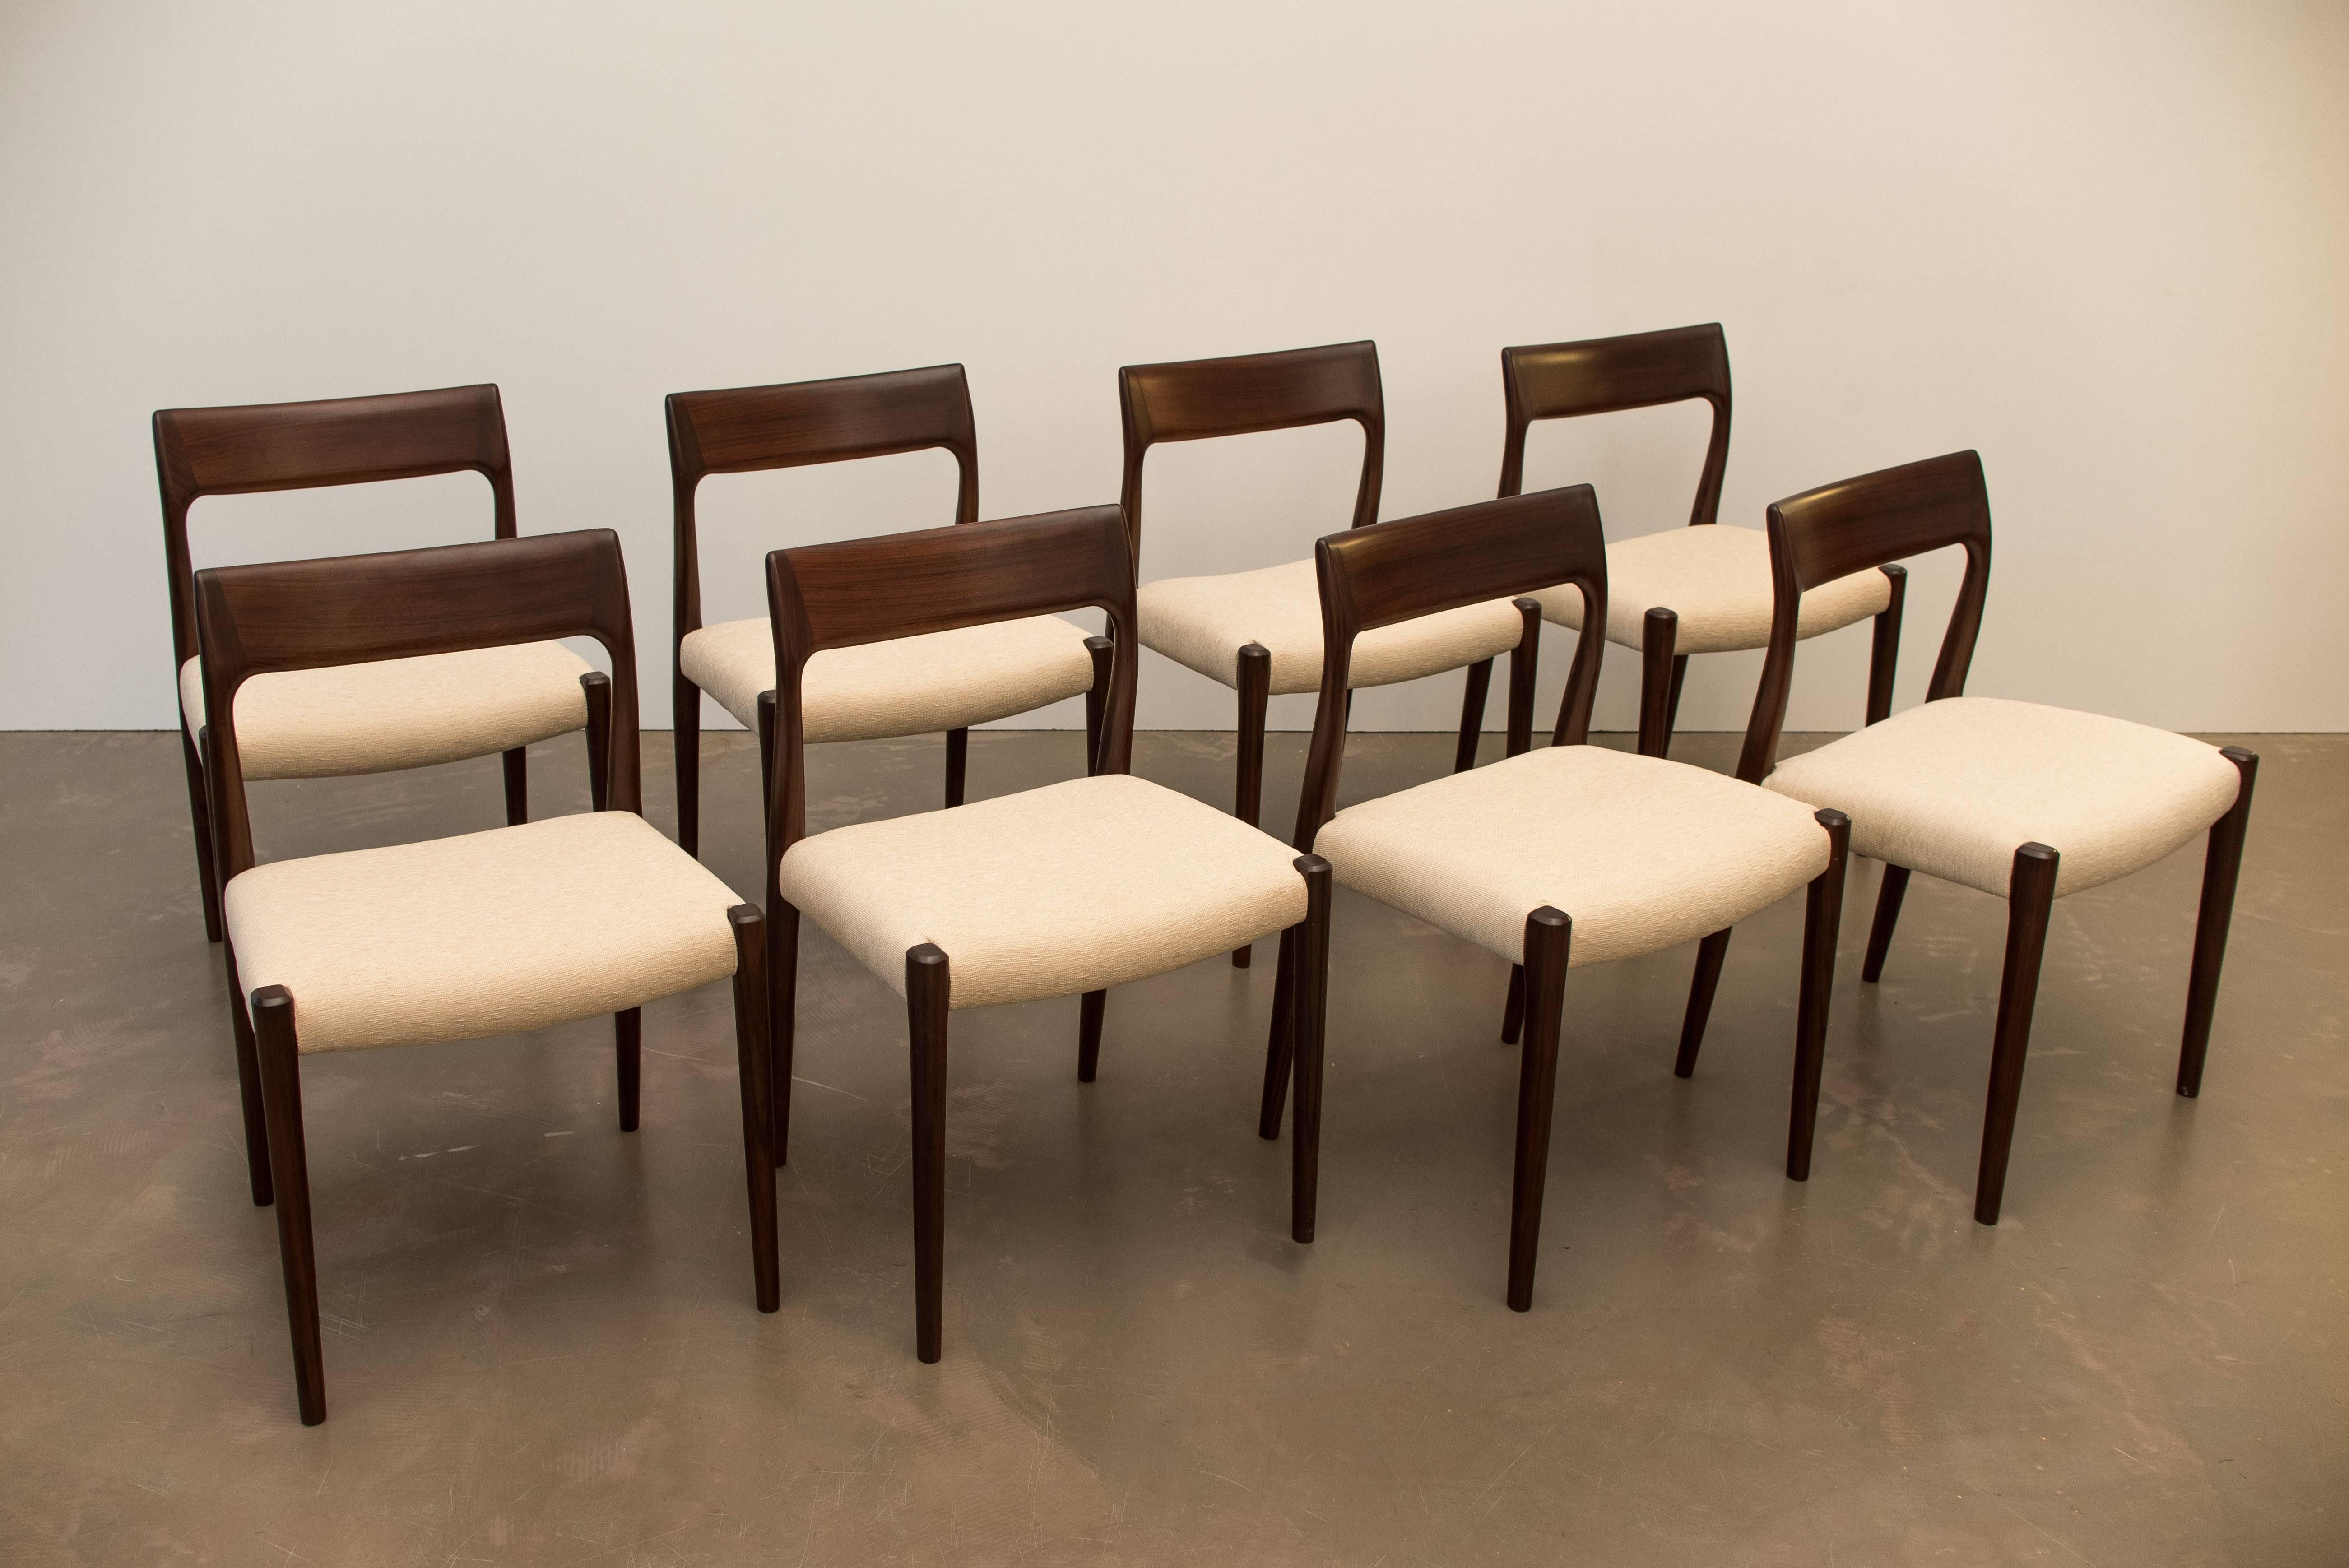 Set of eight dining chairs, designed by Nils Møller and manufactured by J.L. Møllers Møbelfabrik in the 1960s. The frames are made from solid rosewood wood and have new fabric upholstery.